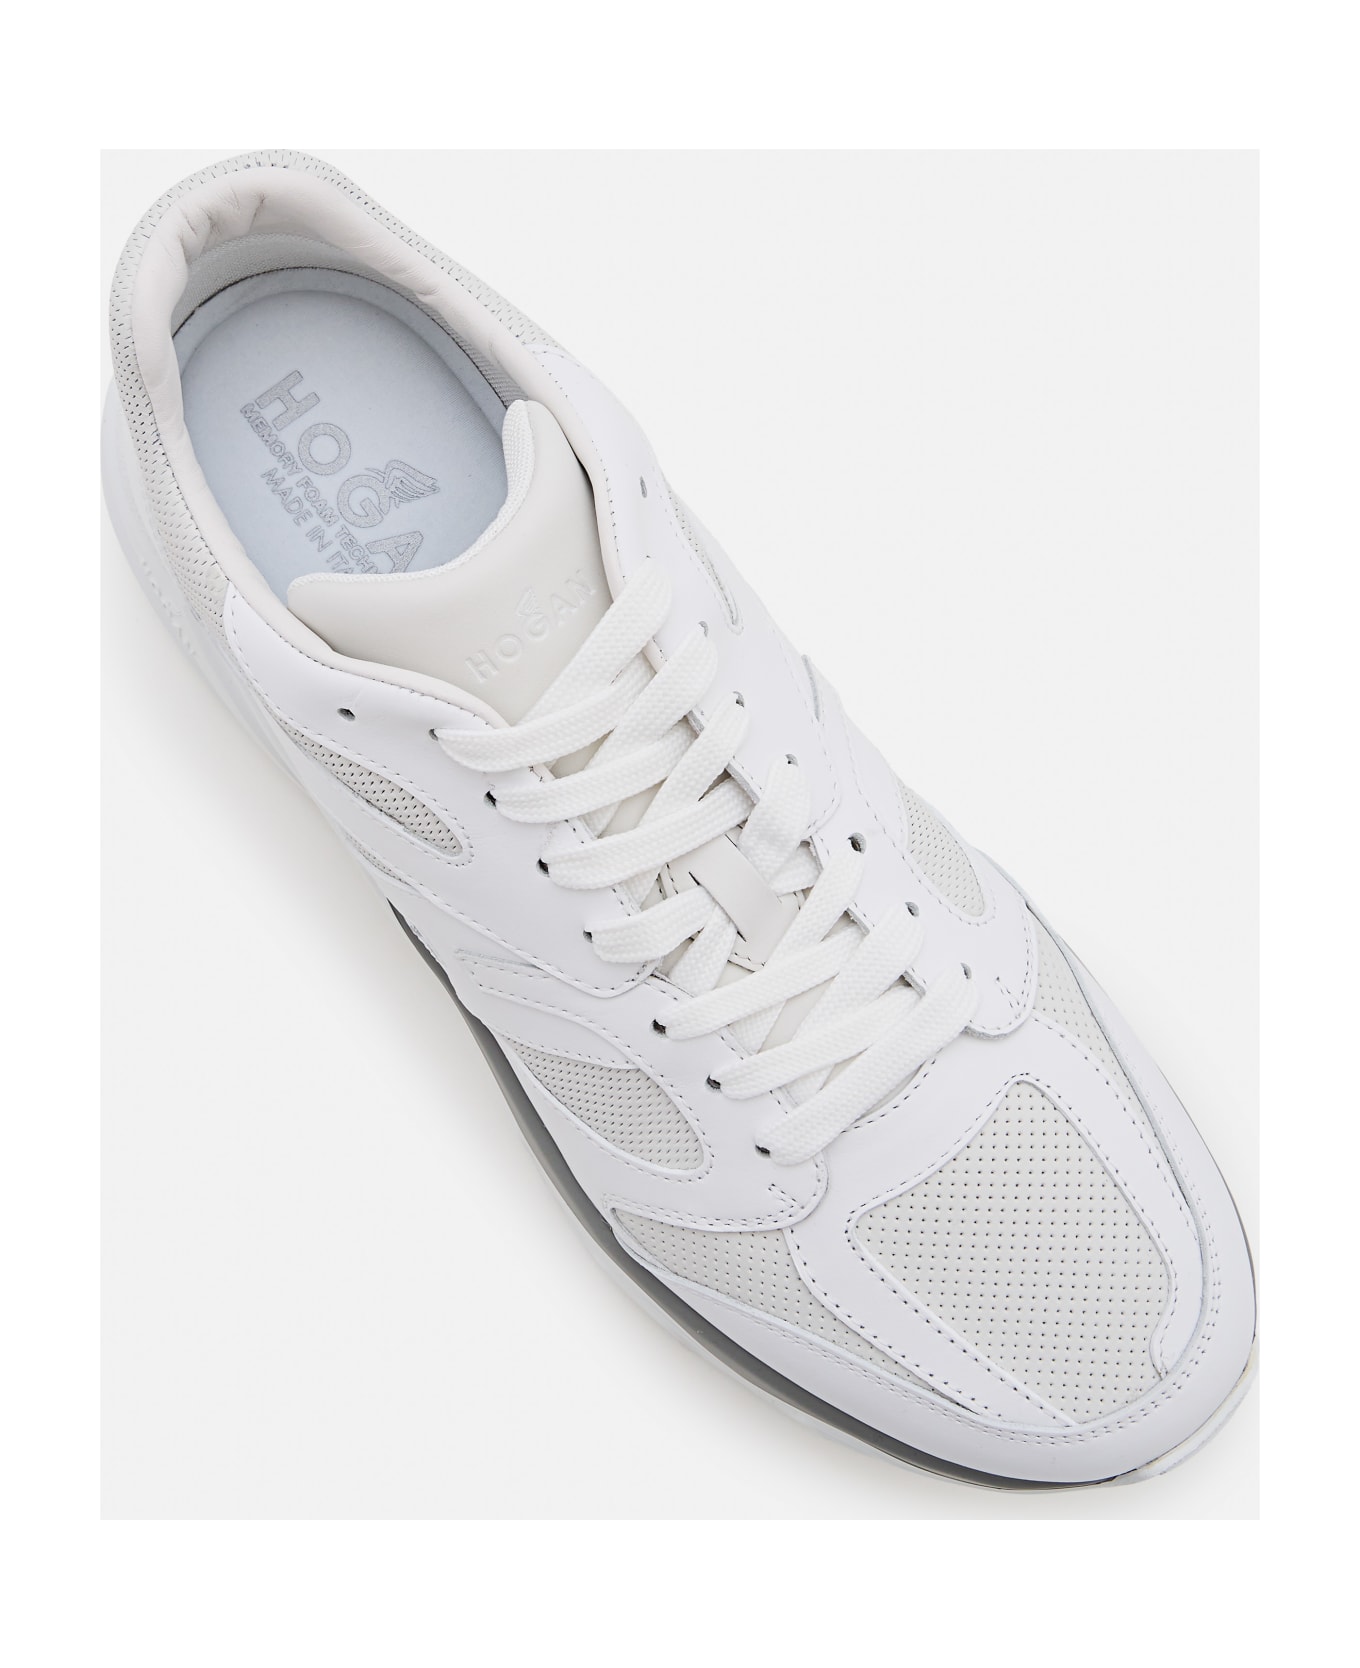 Hogan Allac Panelled Lace-up Sneakers - WHITE スニーカー